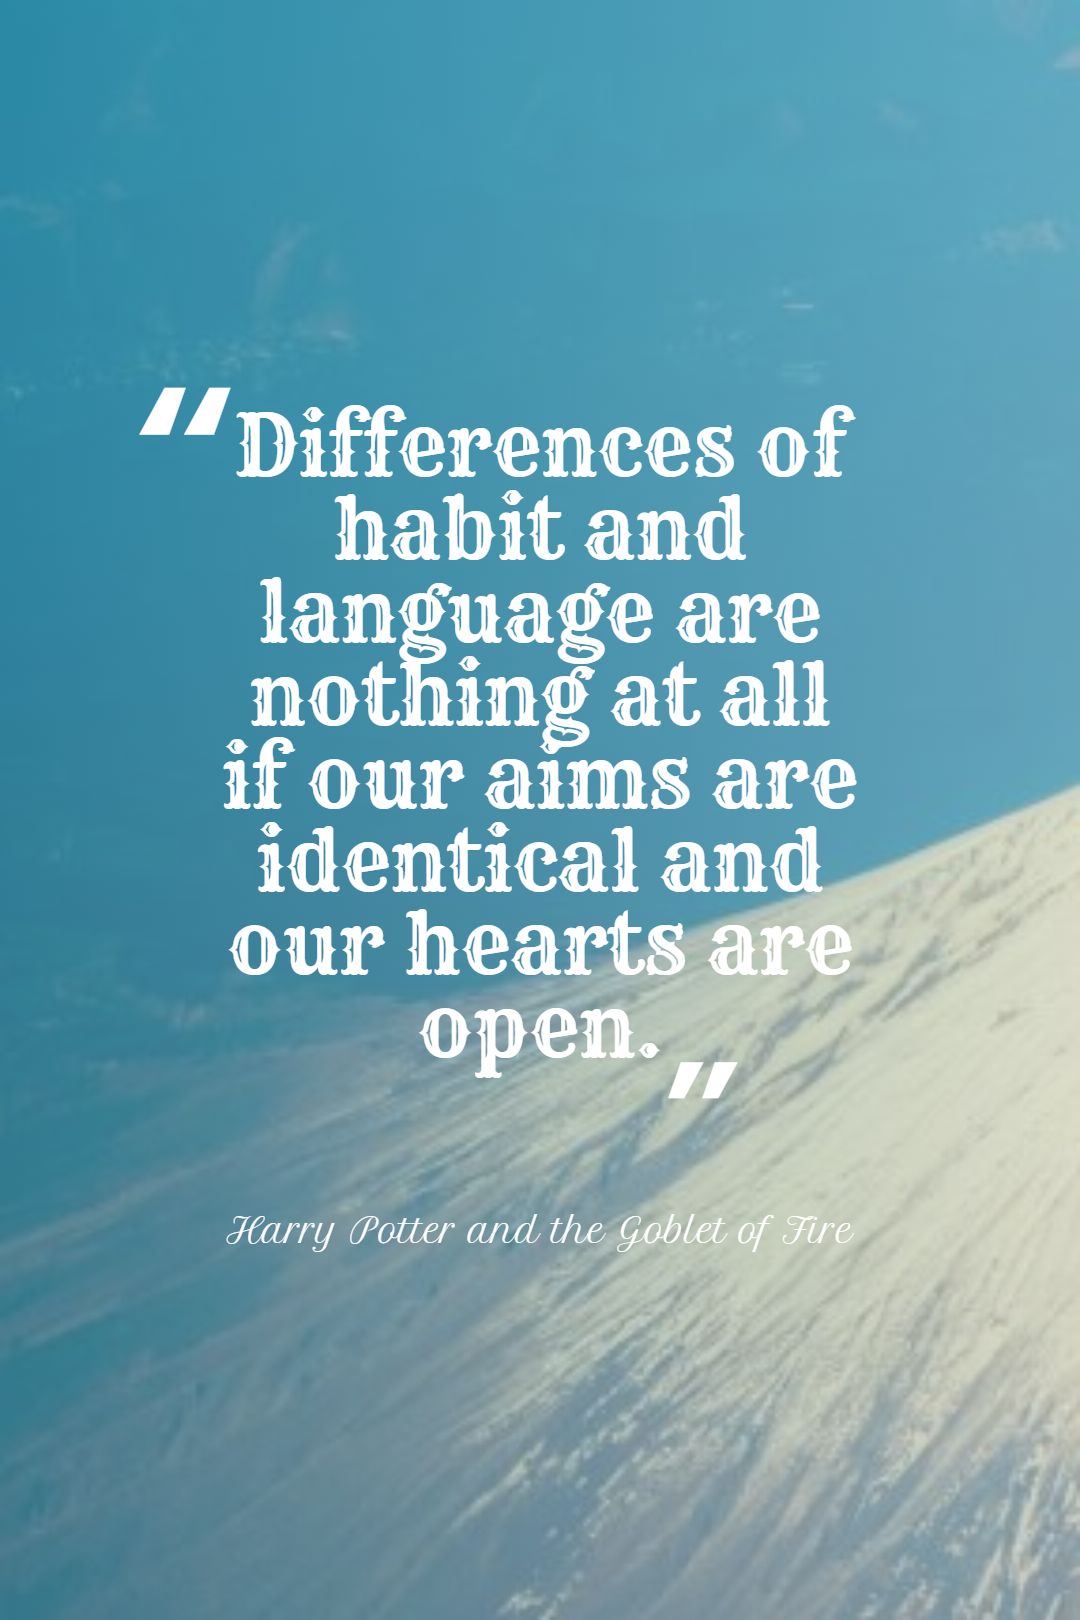 Differences of habit and language are nothing at all if our aims are identical and our hearts are open.